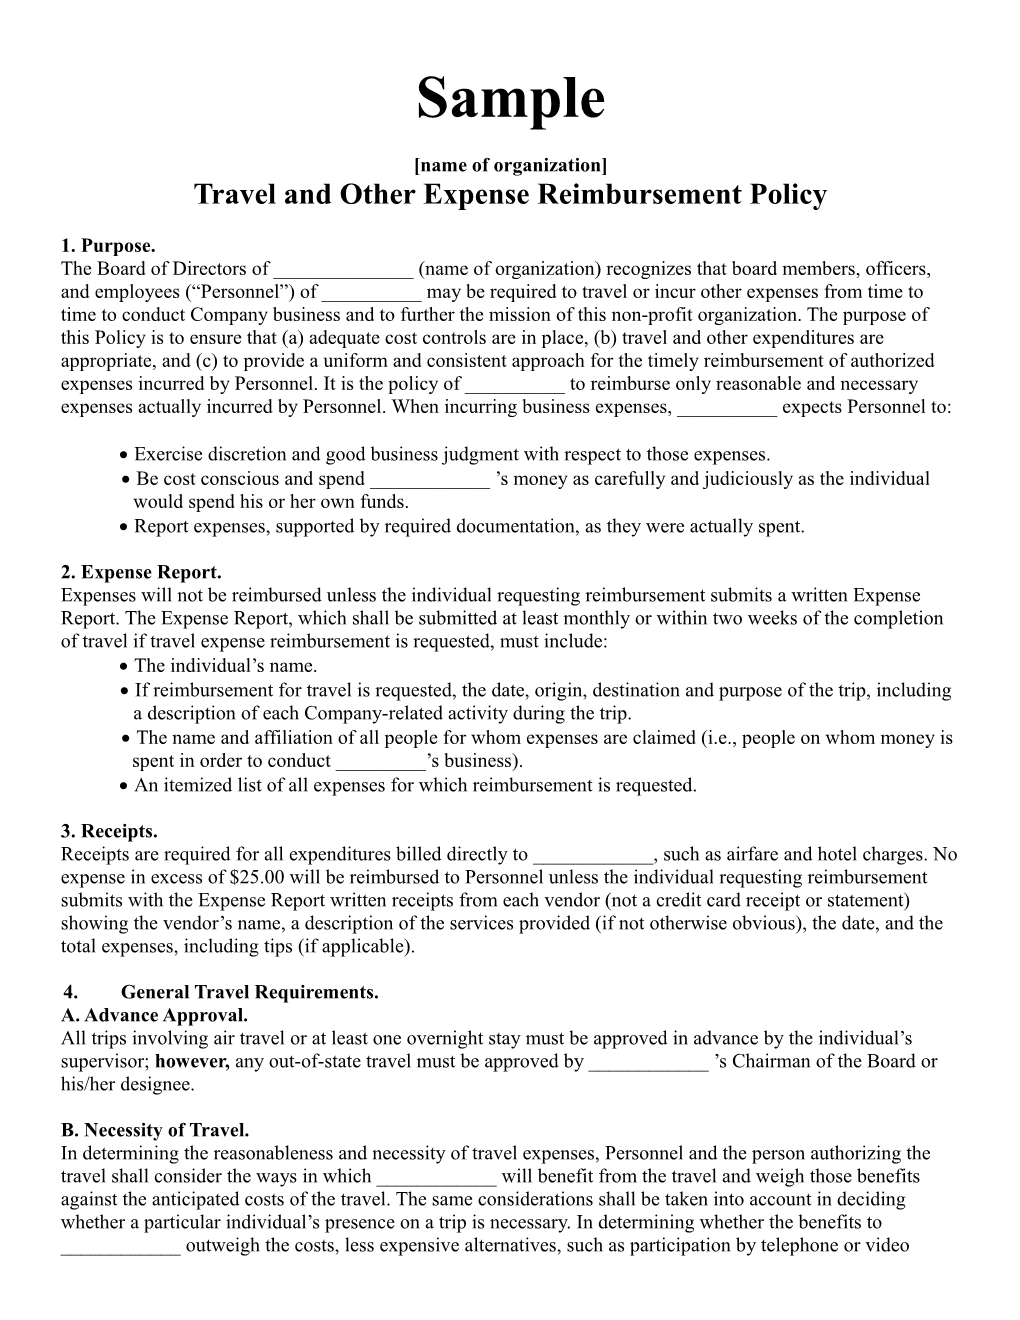 Travel and Other Expense Reimbursement Policy